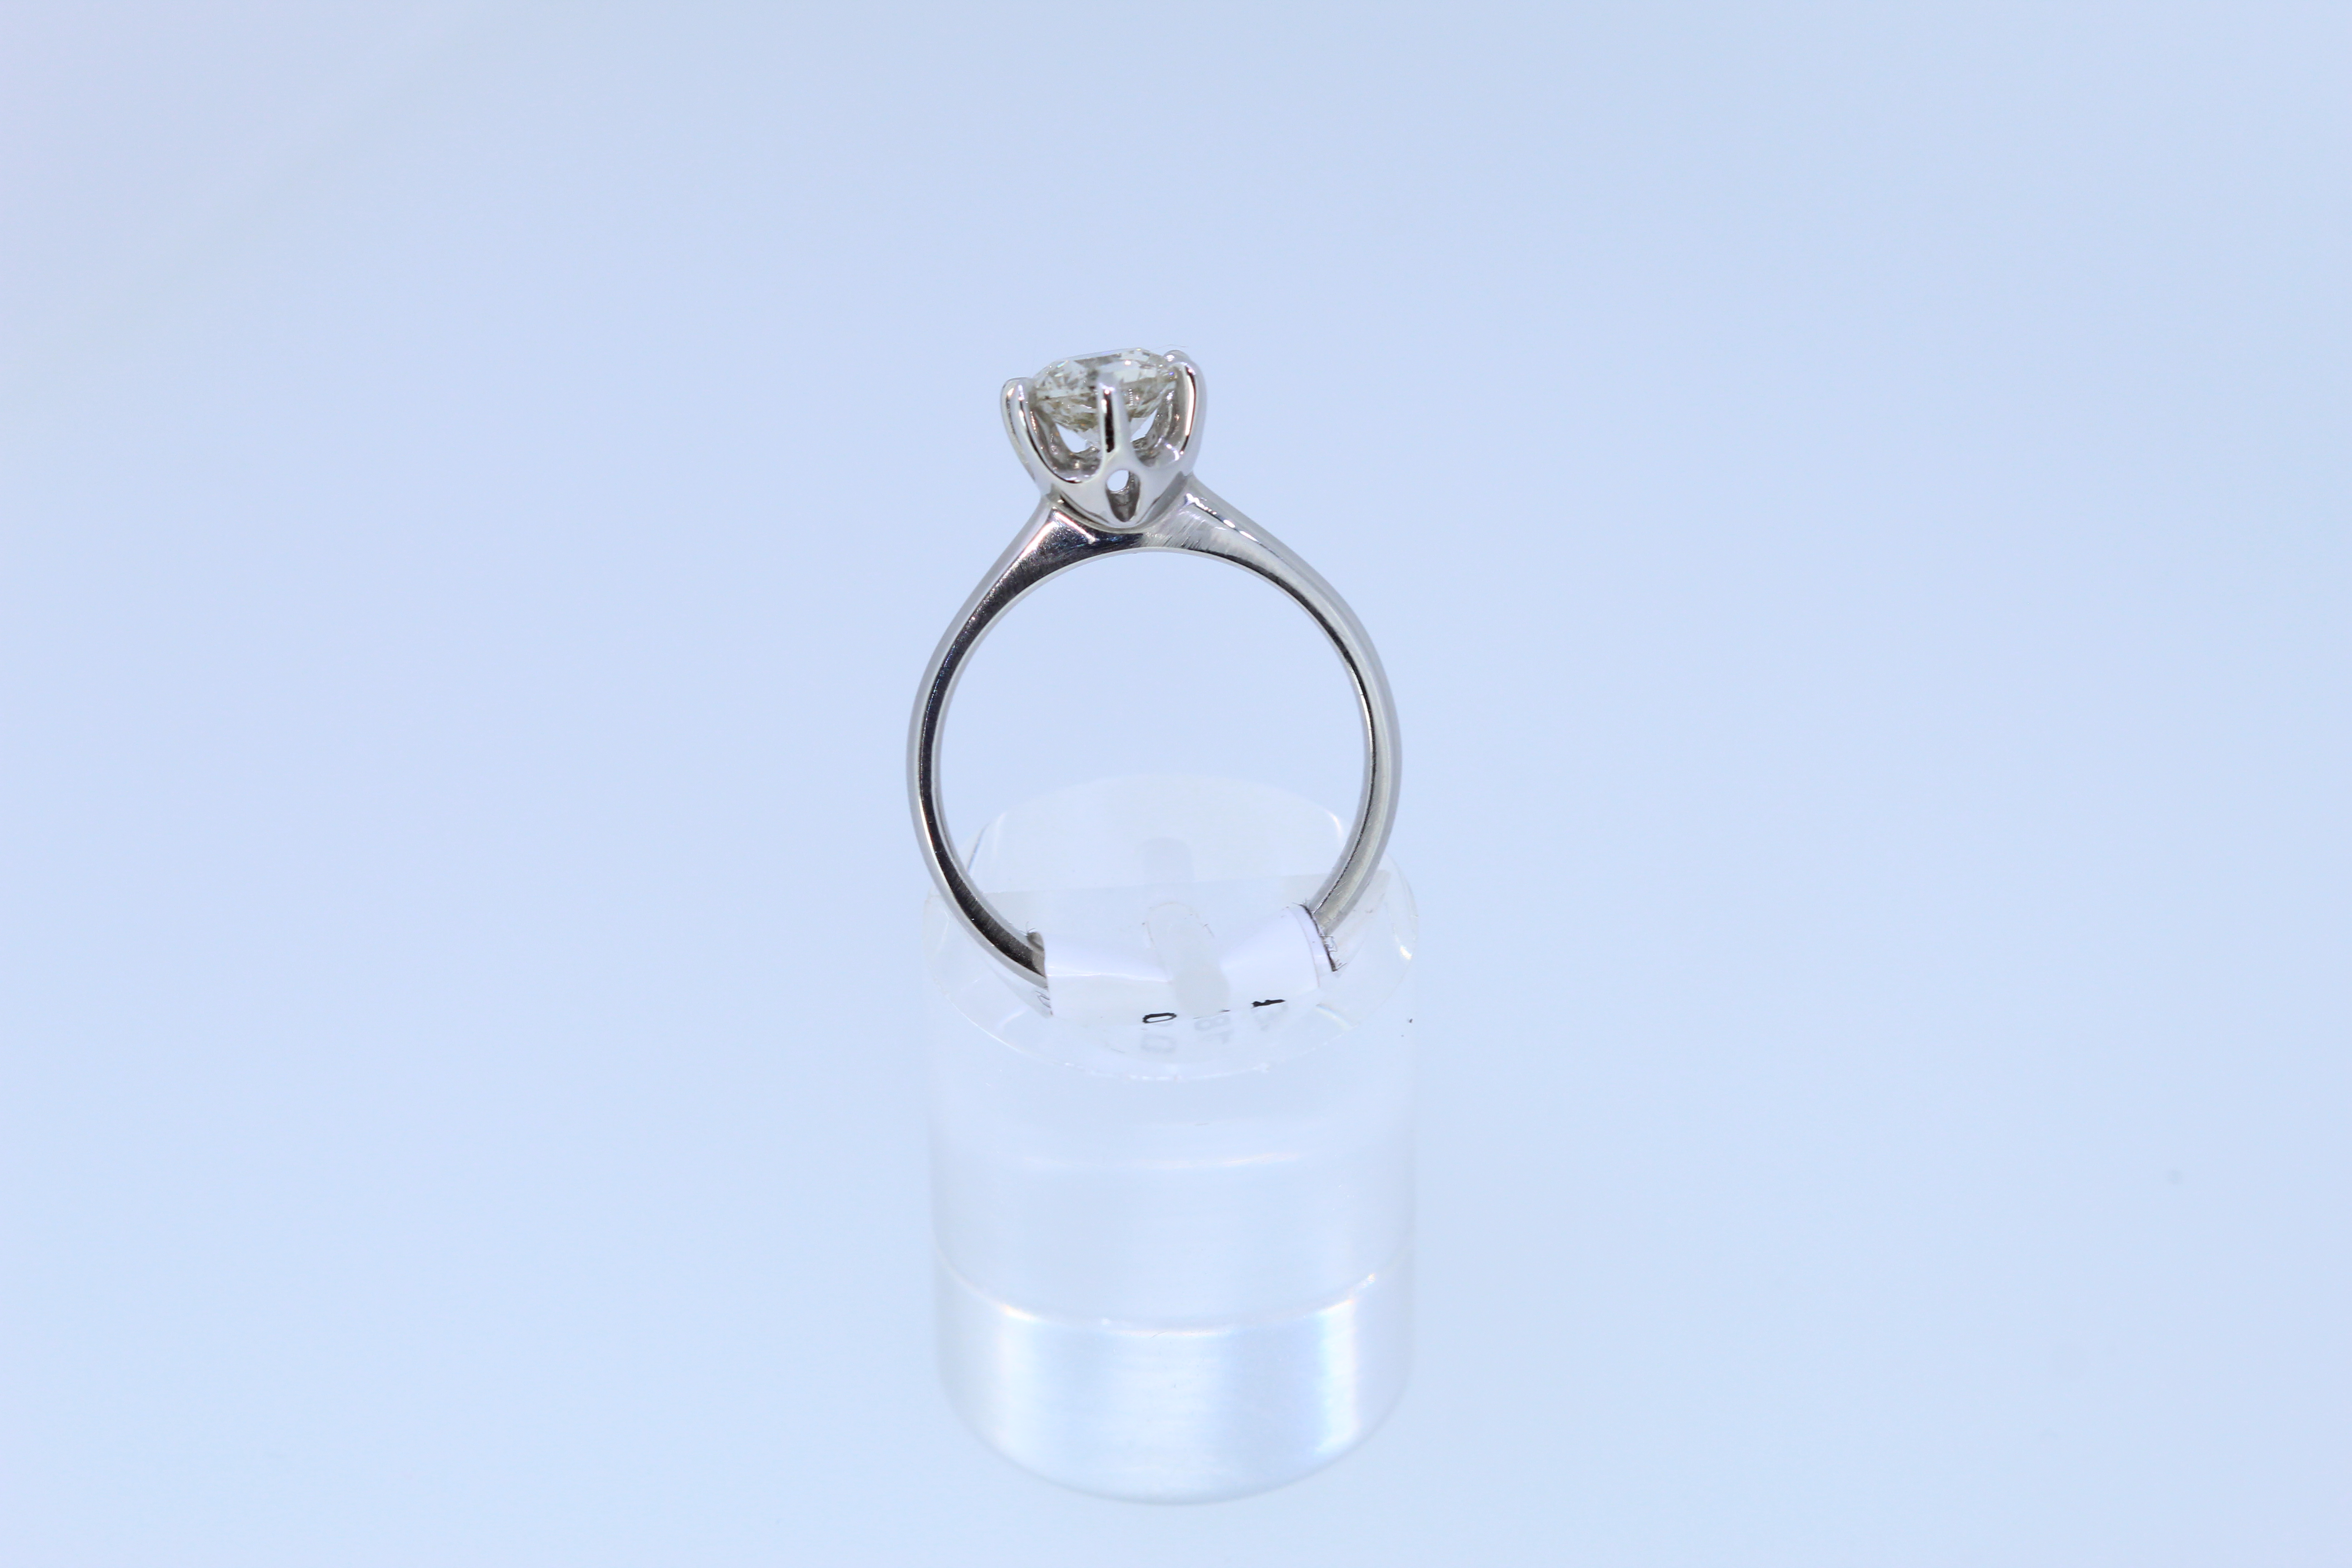 18ct White Gold Solitaire Diamond Ring - Image 3 of 6